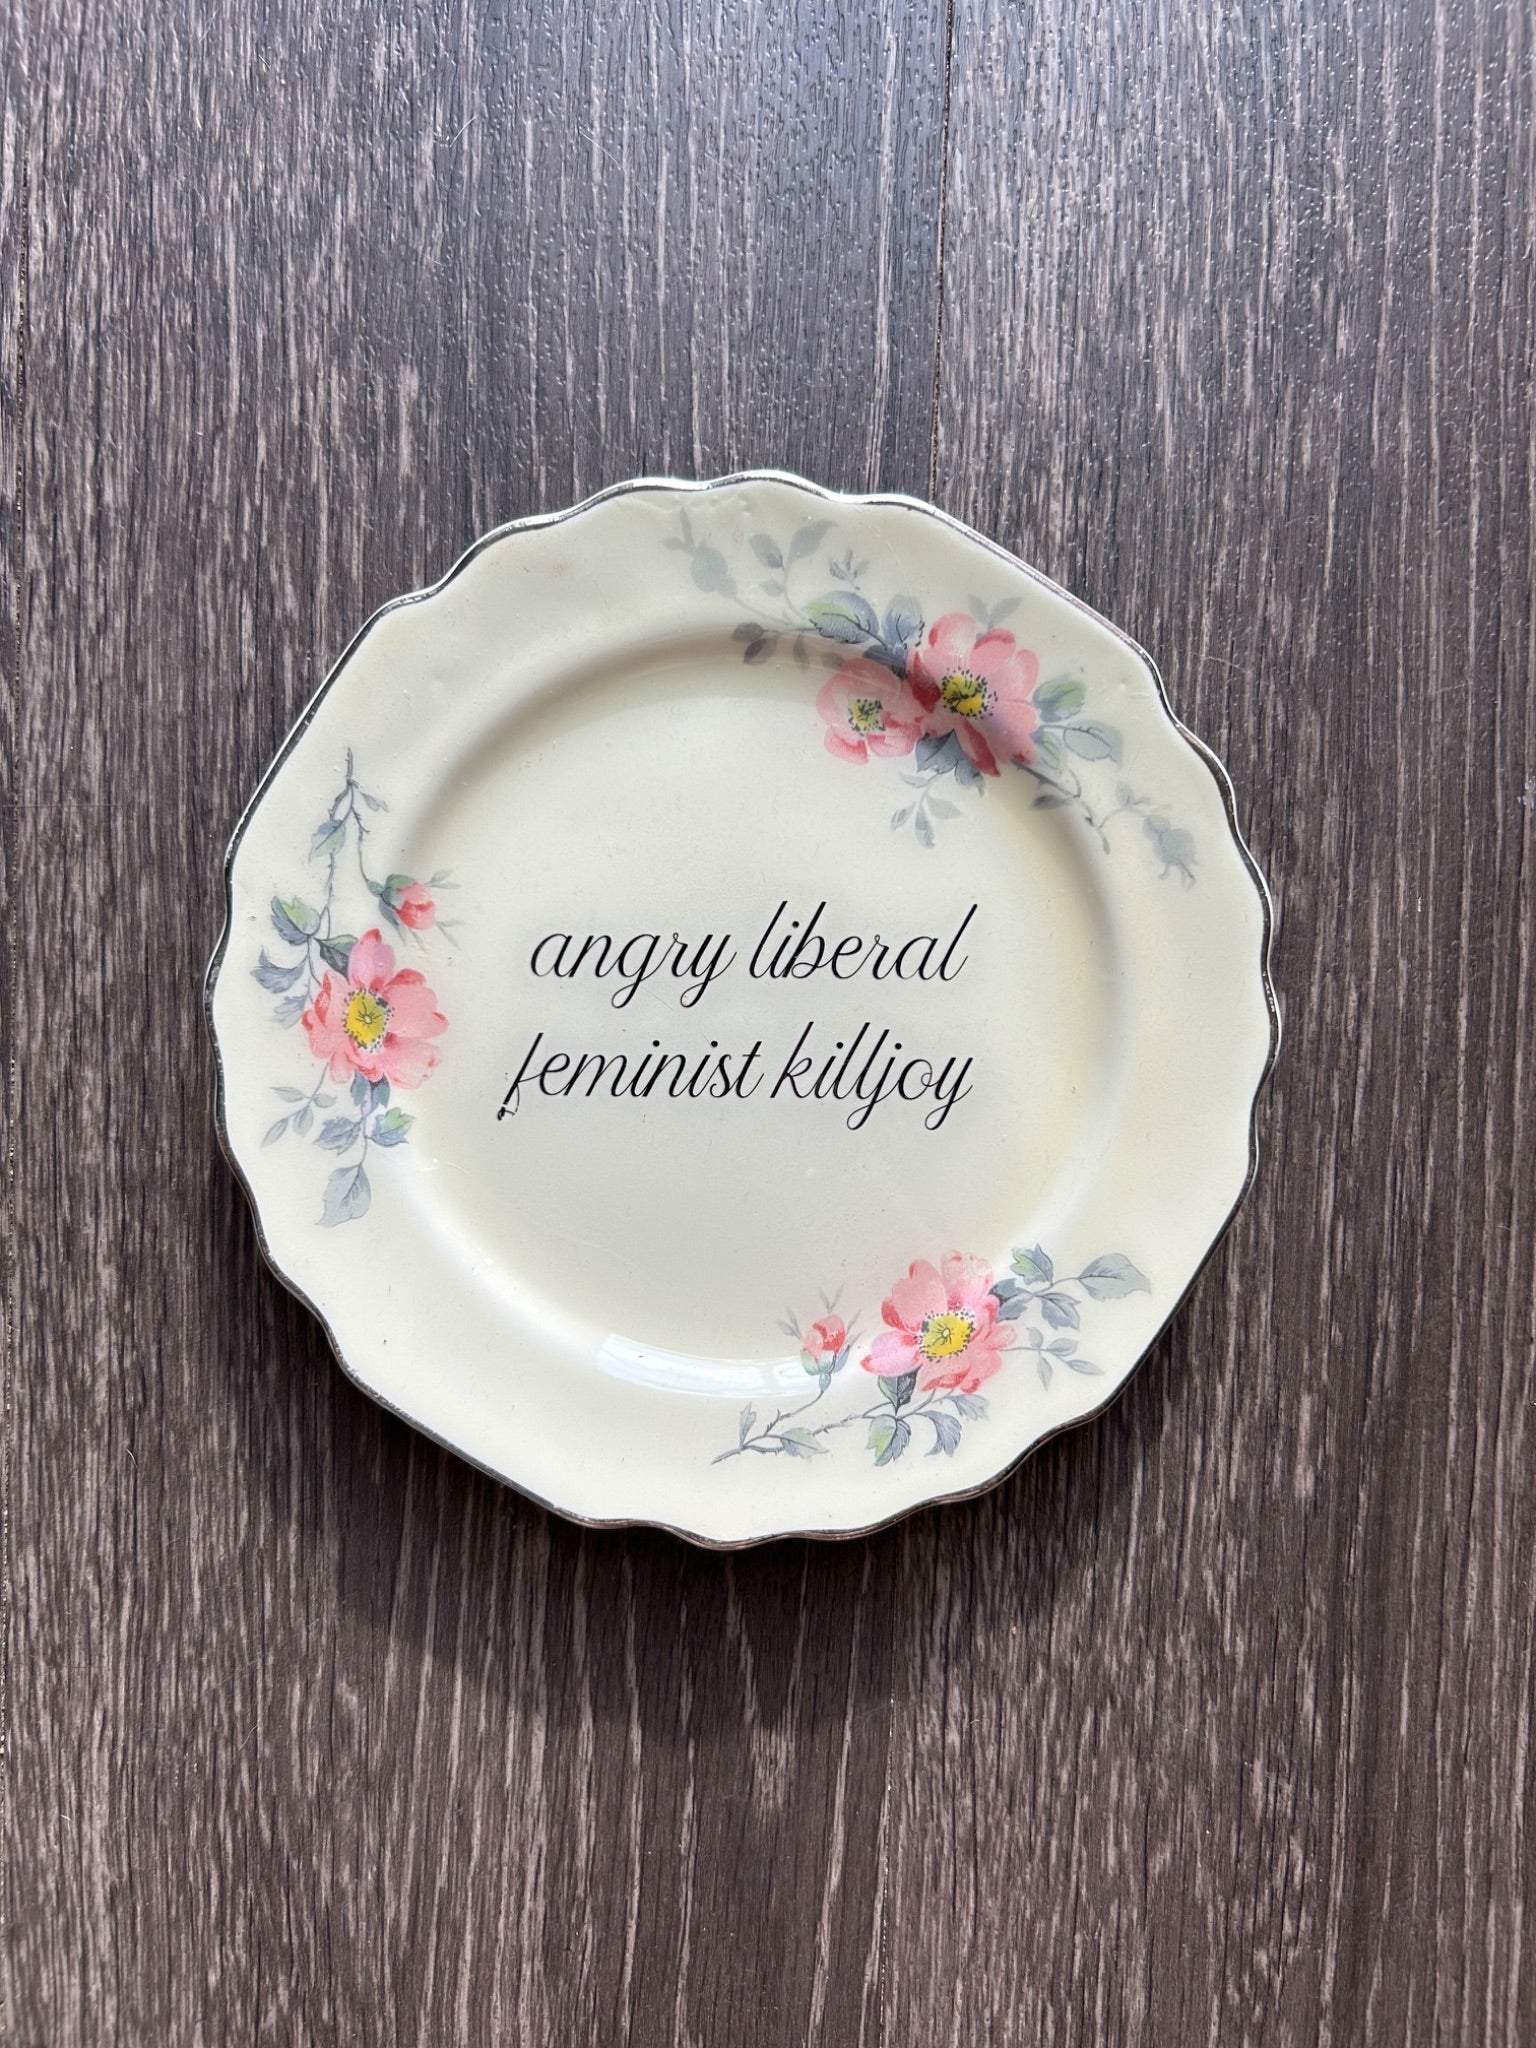 Small & Medium Sassy Plates by The Porcelain Pigeon - 20